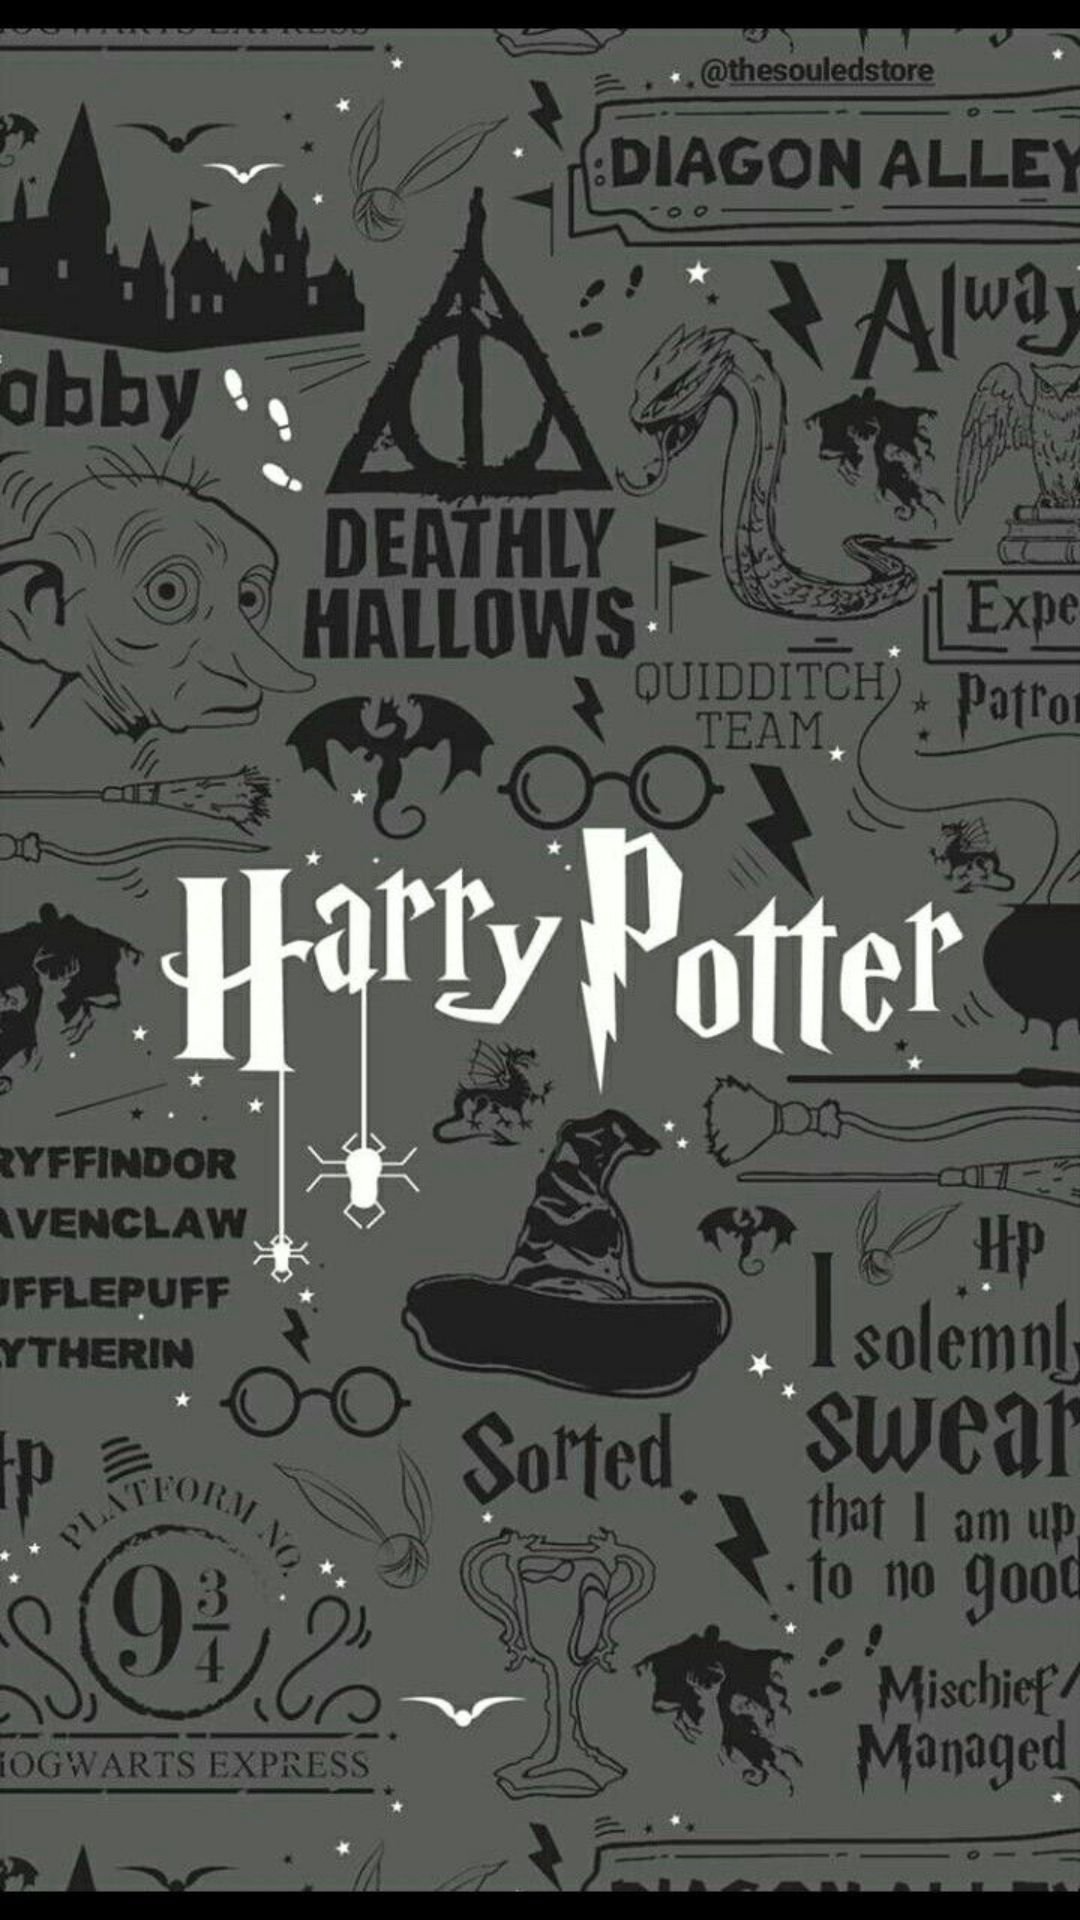 Harry Potter iPhone Wallpaper with high-resolution 1080x1920 pixel. You can use this wallpaper for your iPhone 5, 6, 7, 8, X, XS, XR backgrounds, Mobile Screensaver, or iPad Lock Screen - Hogwarts, Harry Potter